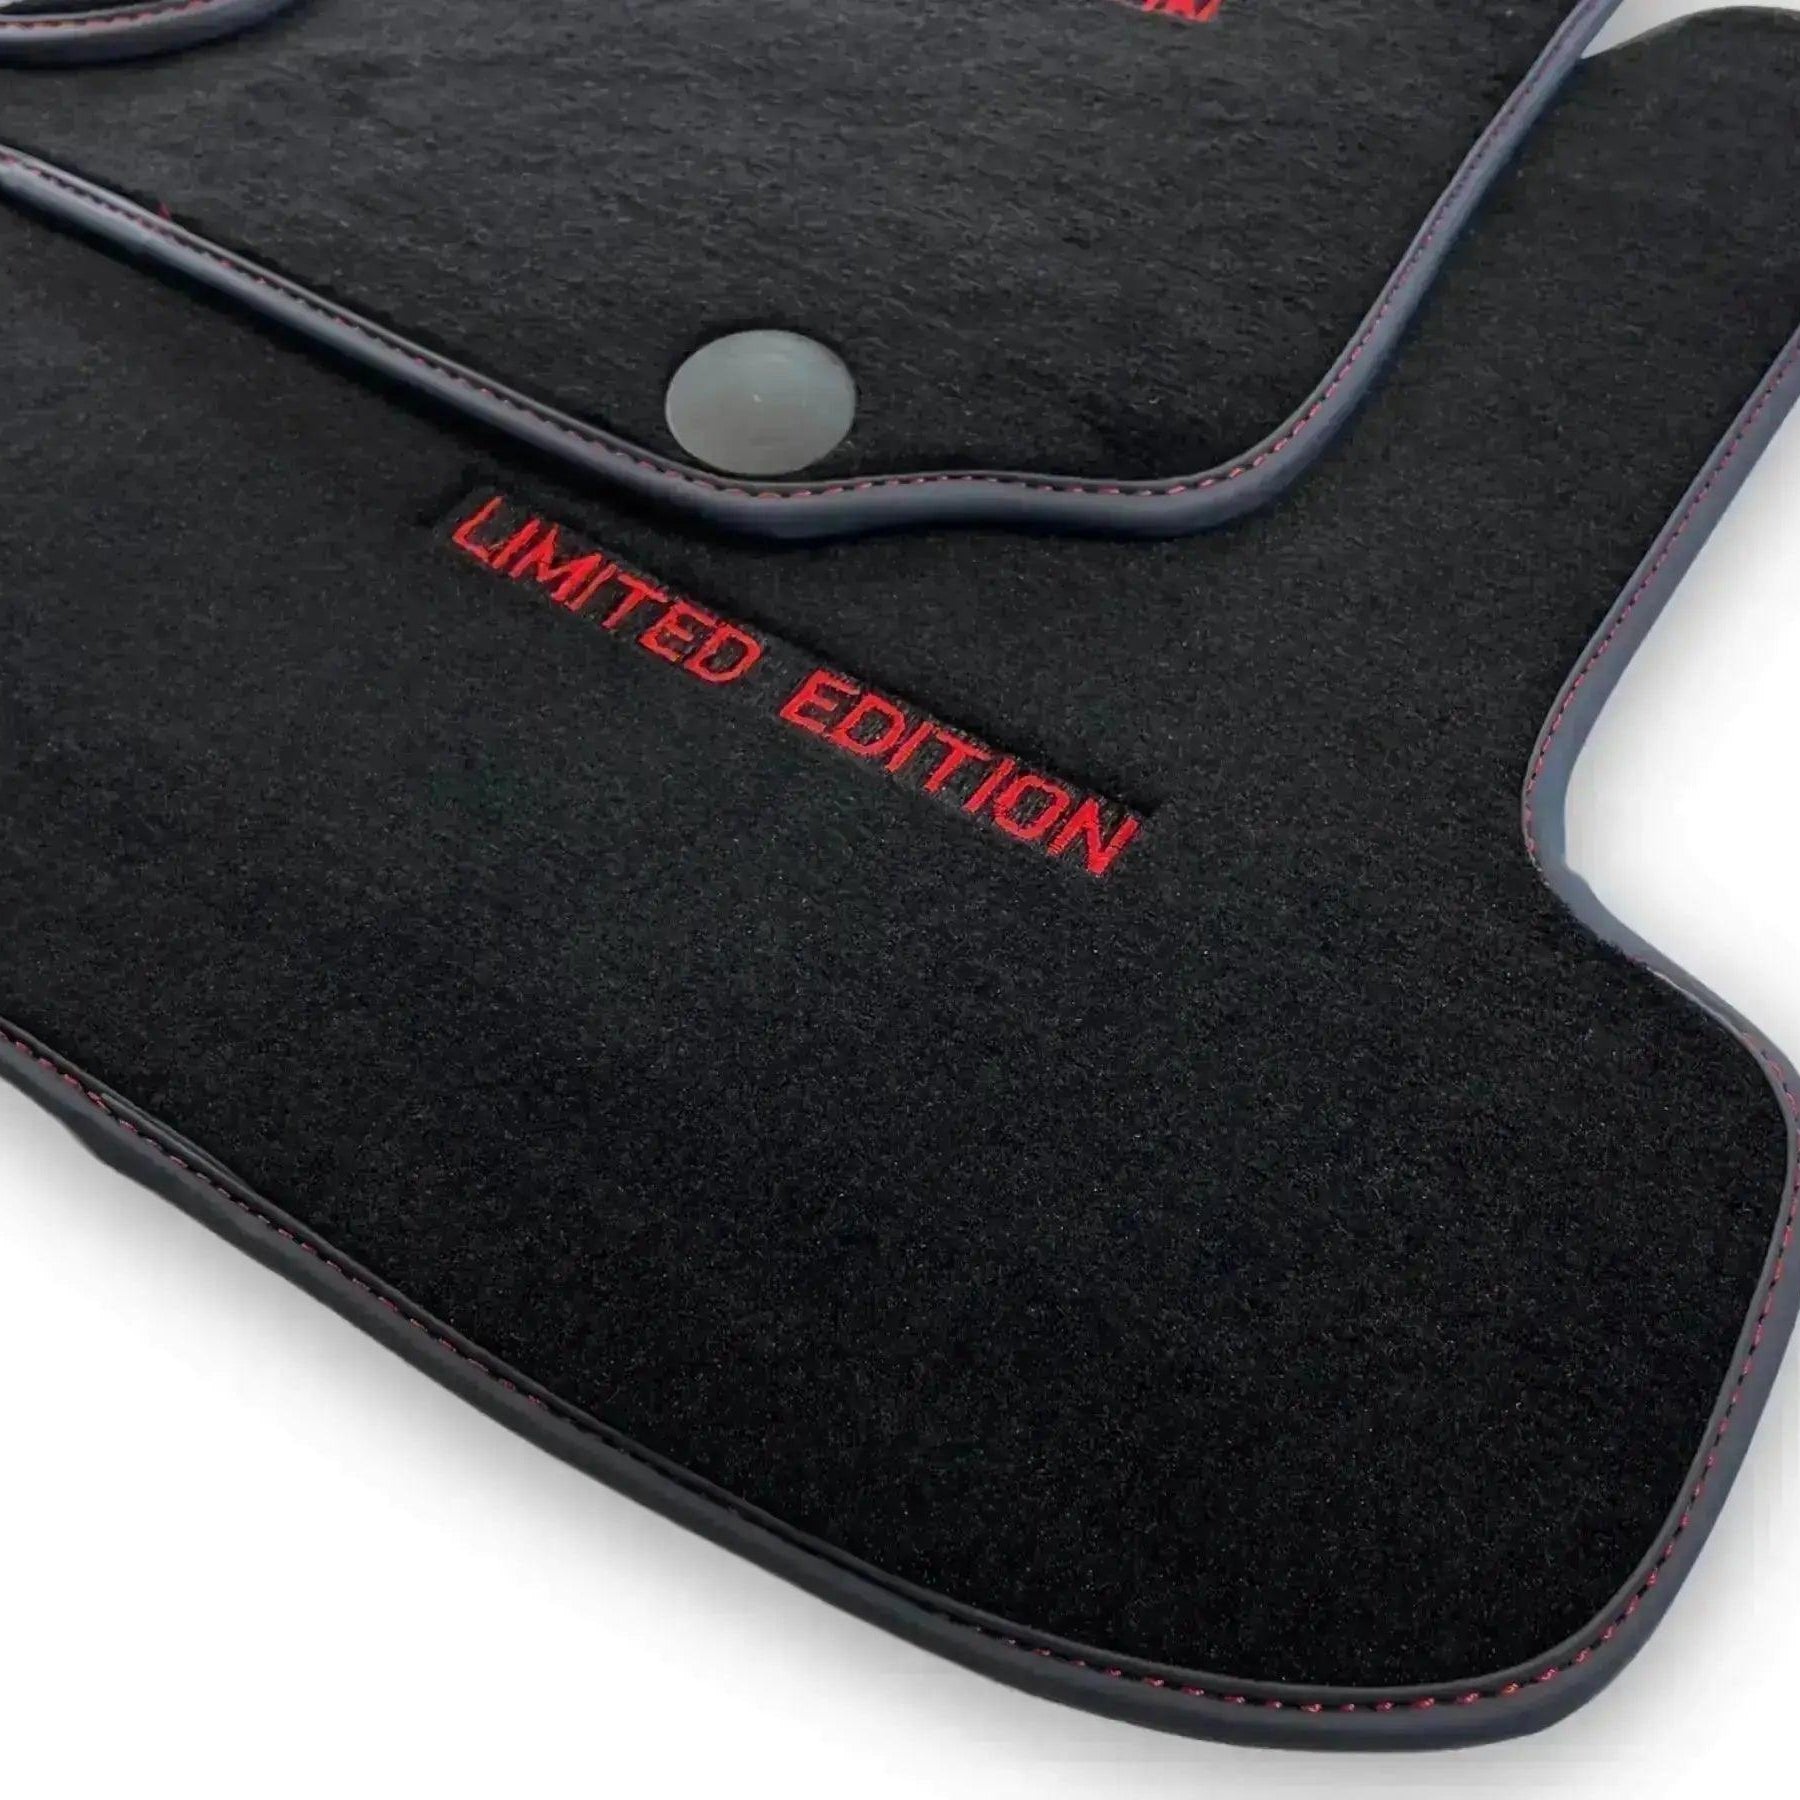 Beige Floor Mats For Mercedes Benz GLE-Class V167 Allrounder - 5 Seats (2019-2023) | Limited Edition